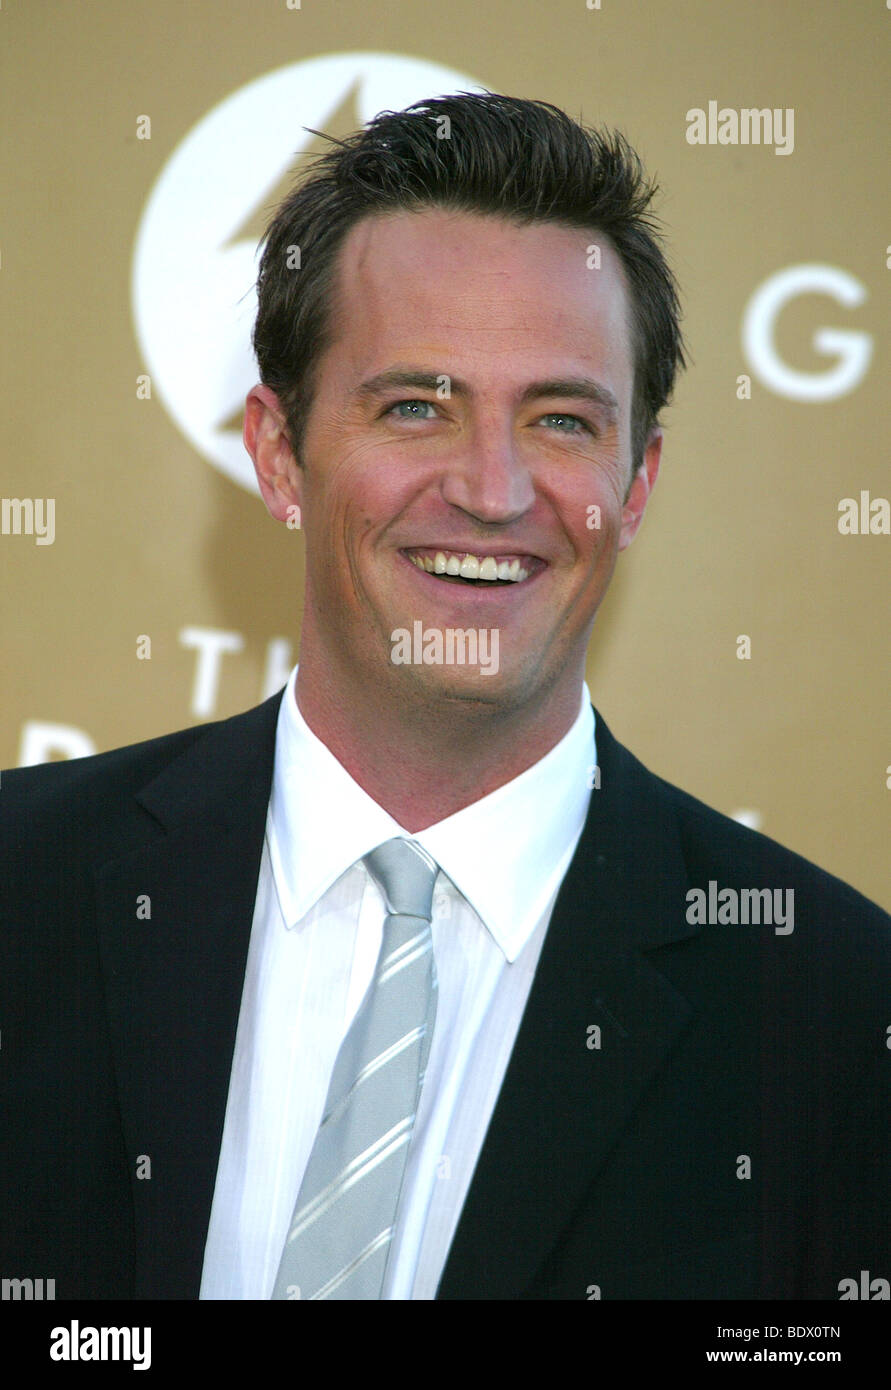 MATTHEW PERRY - US TV and film actor Stock Photo